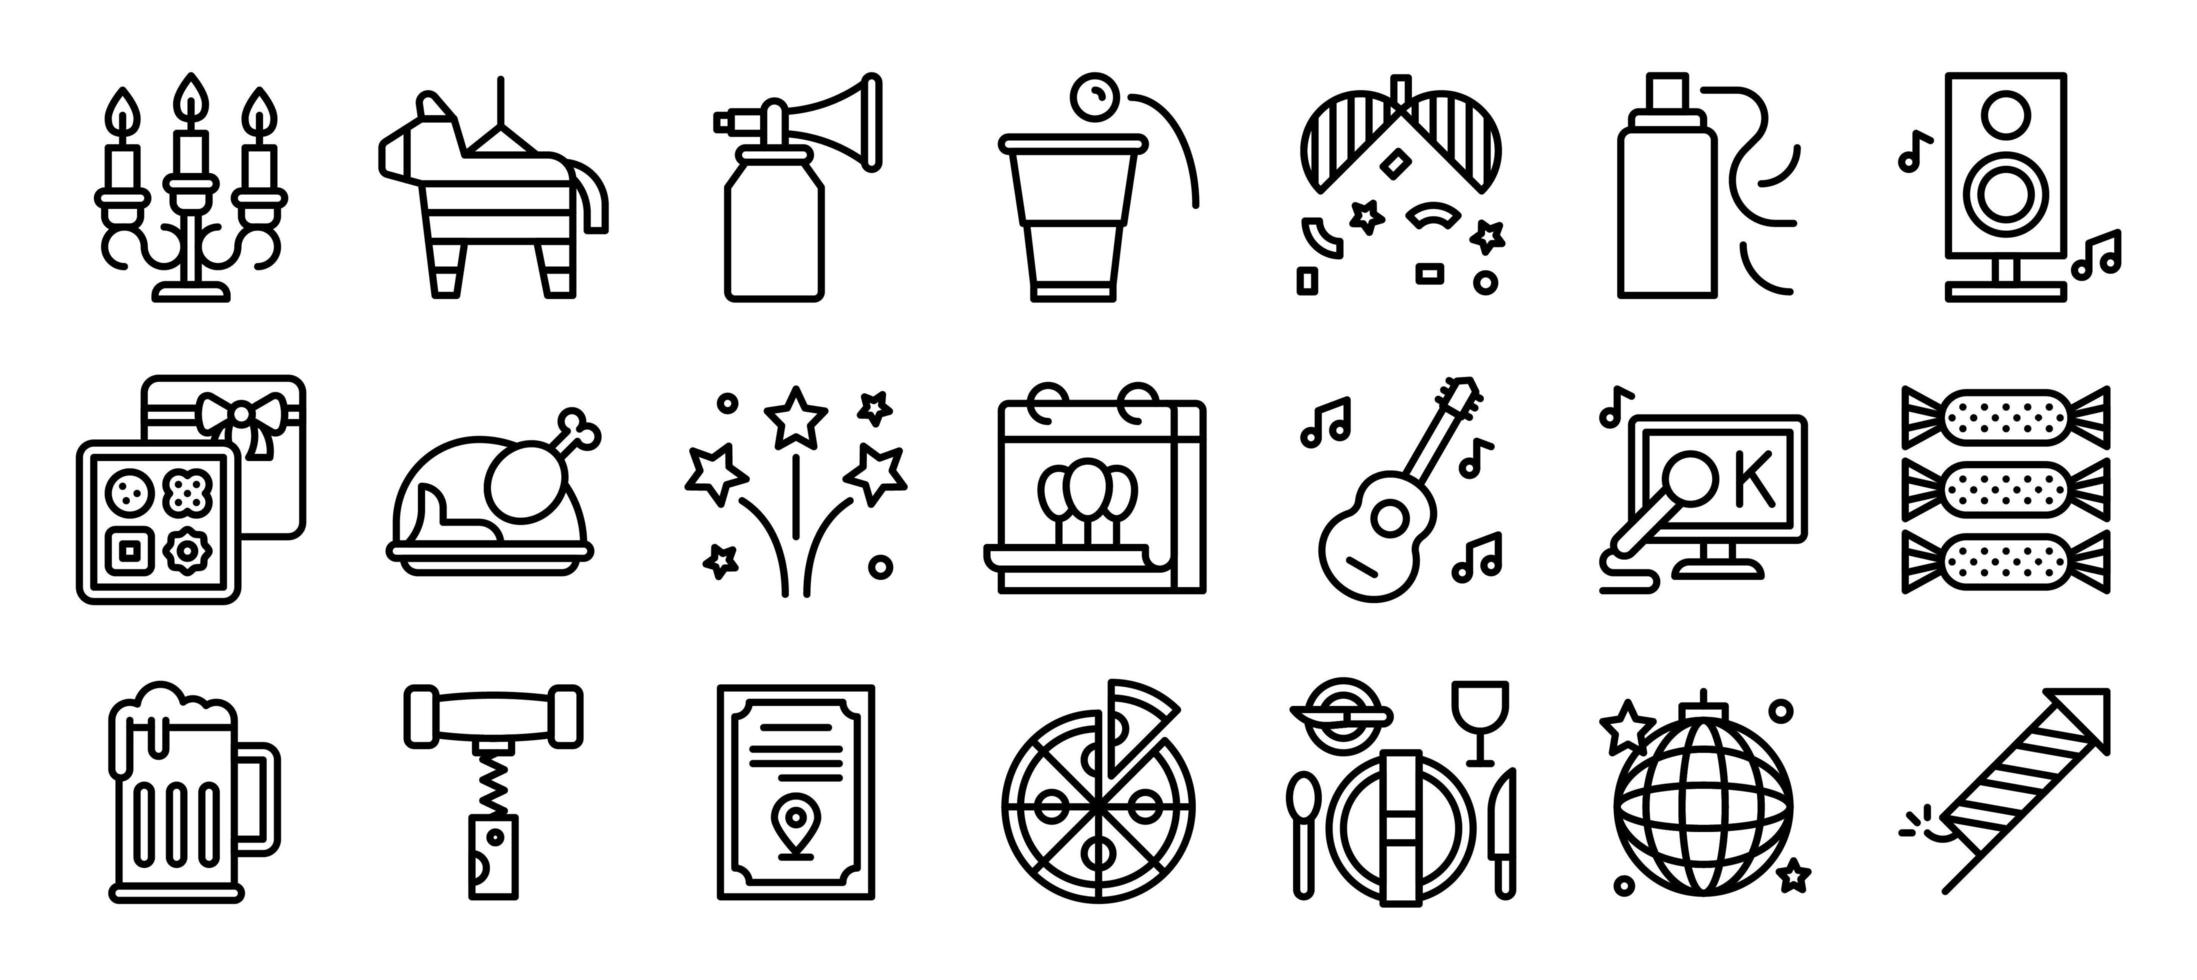 New year party elements line icon set vector